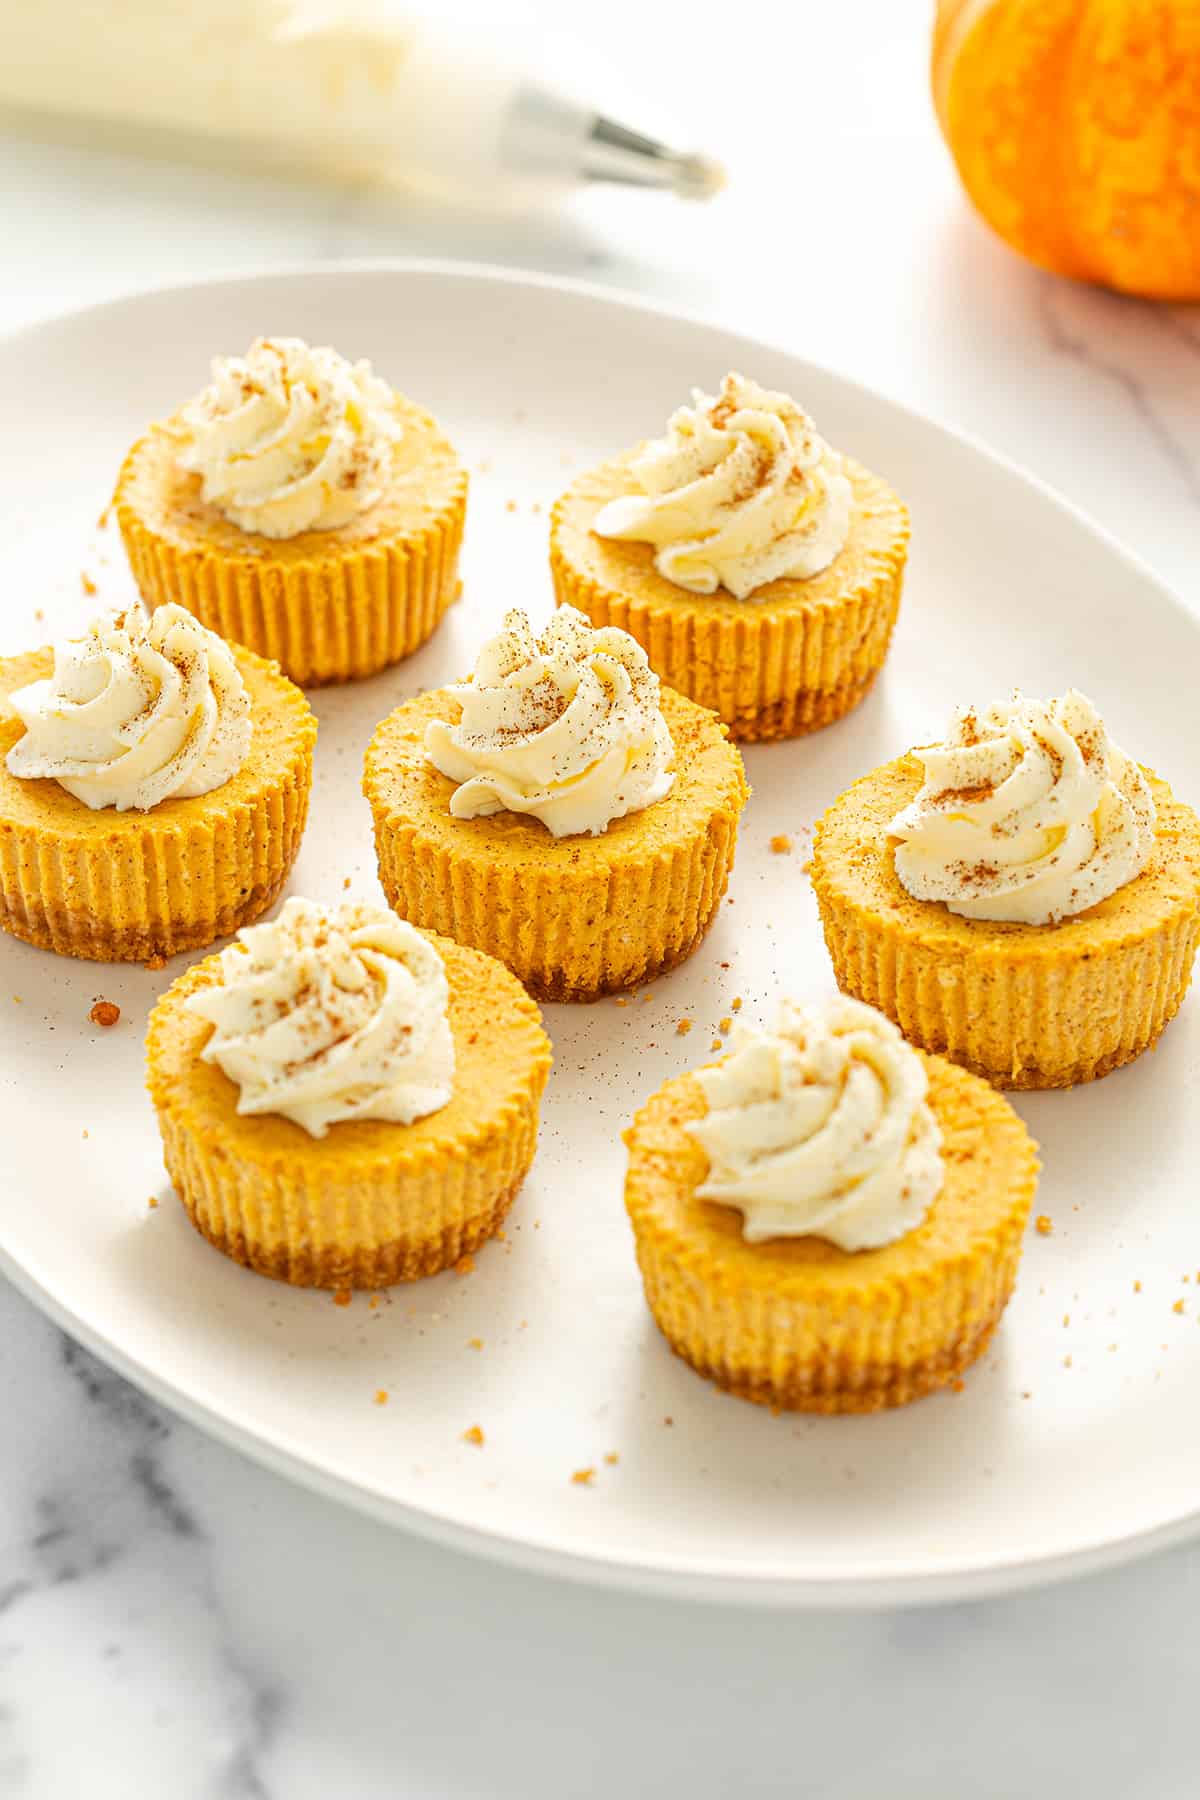 Seven mini pumpkin cheesecakes topped with whipped cream and a sprinkle of cinnamon on an oval serving platter with an orange pumpkin and a piping bag filled with whipped cream on a white counter top.